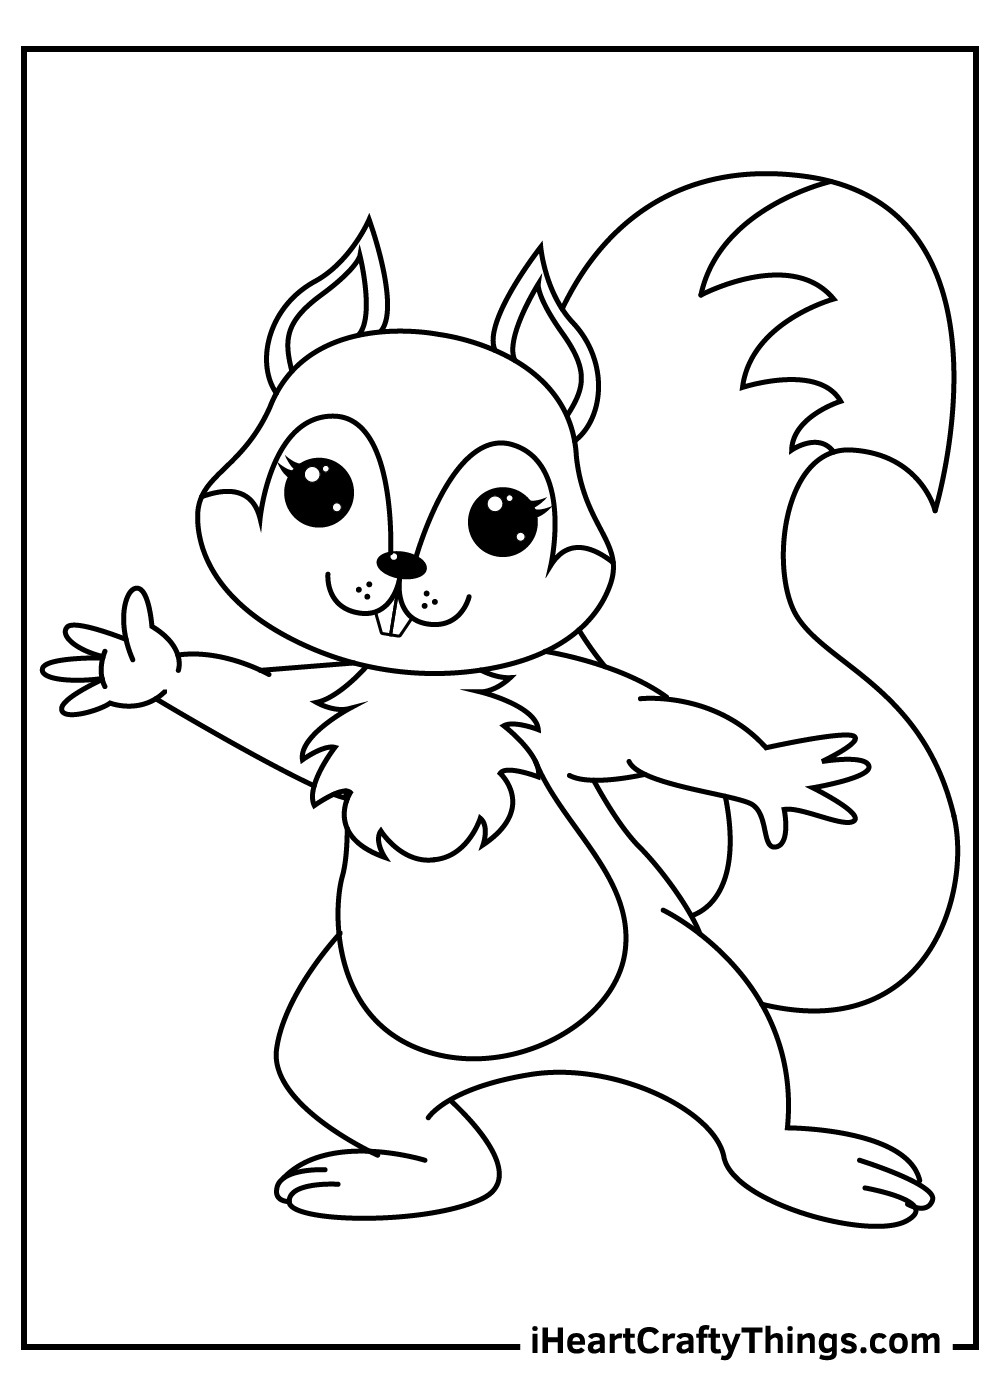 cartoon squirrels coloring pages free download